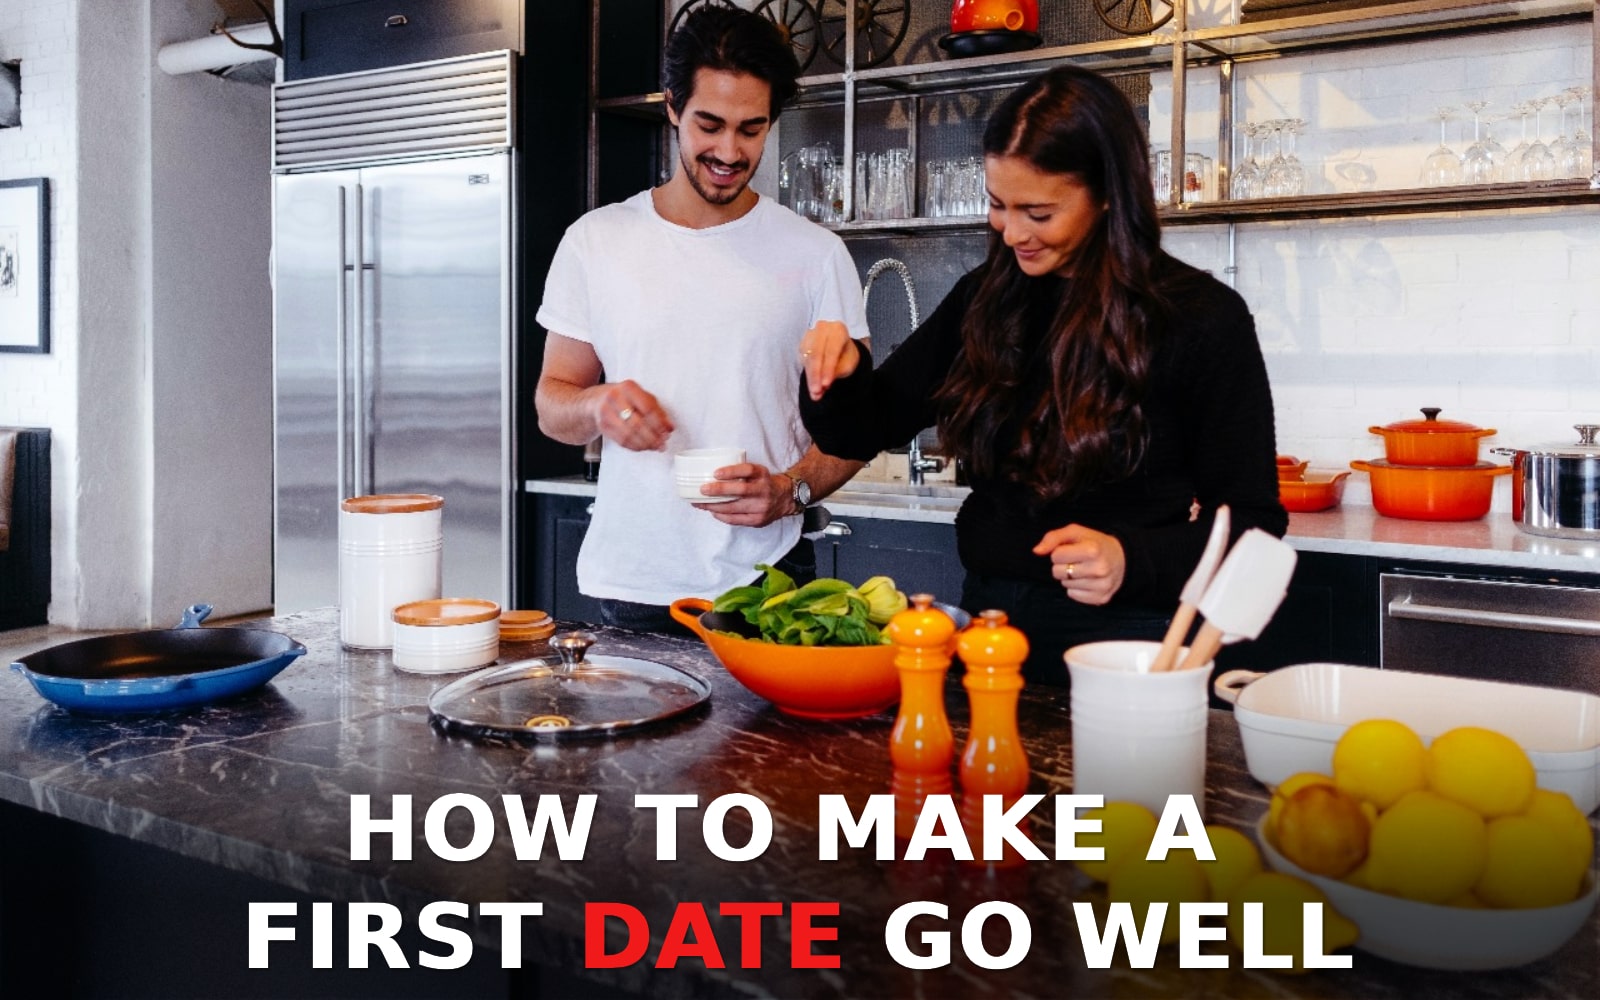 How to make a first date go well